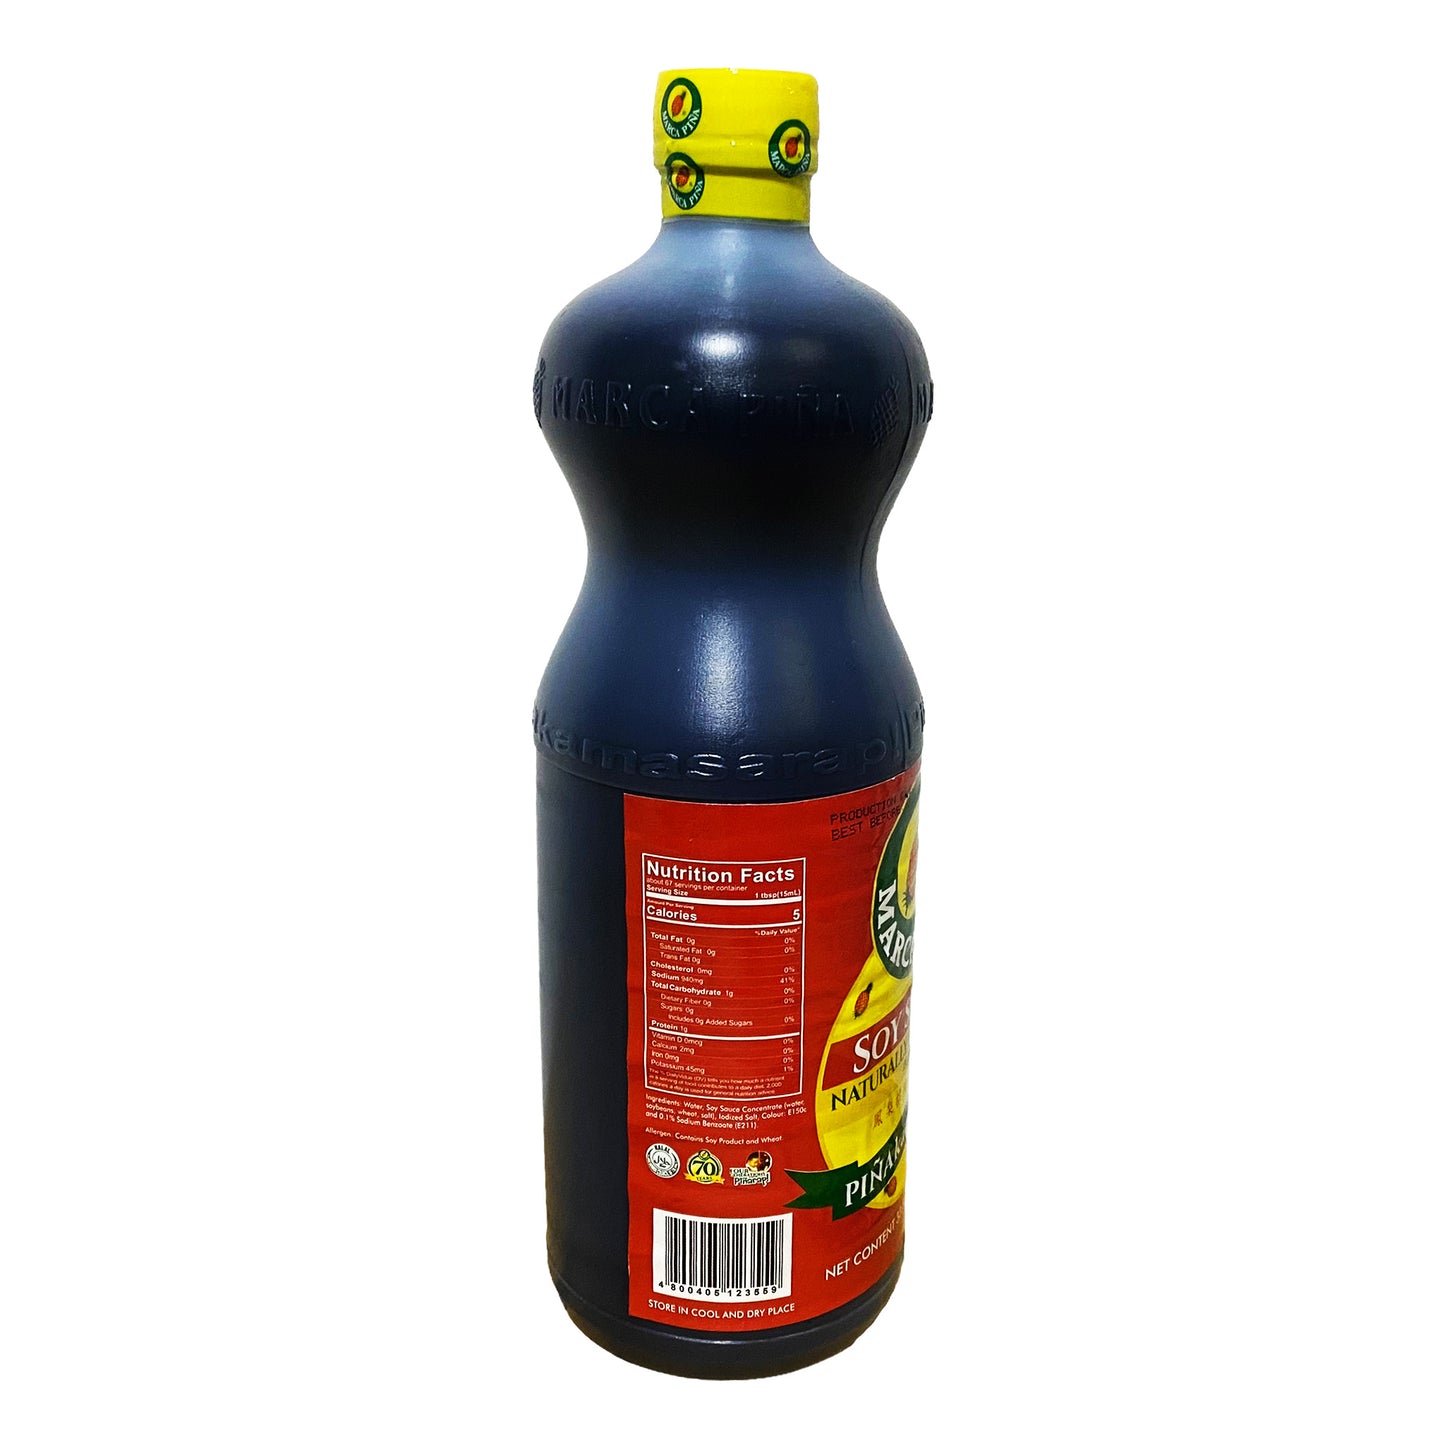 Back graphic view of Marca Pina Soy Sauce 33.81oz